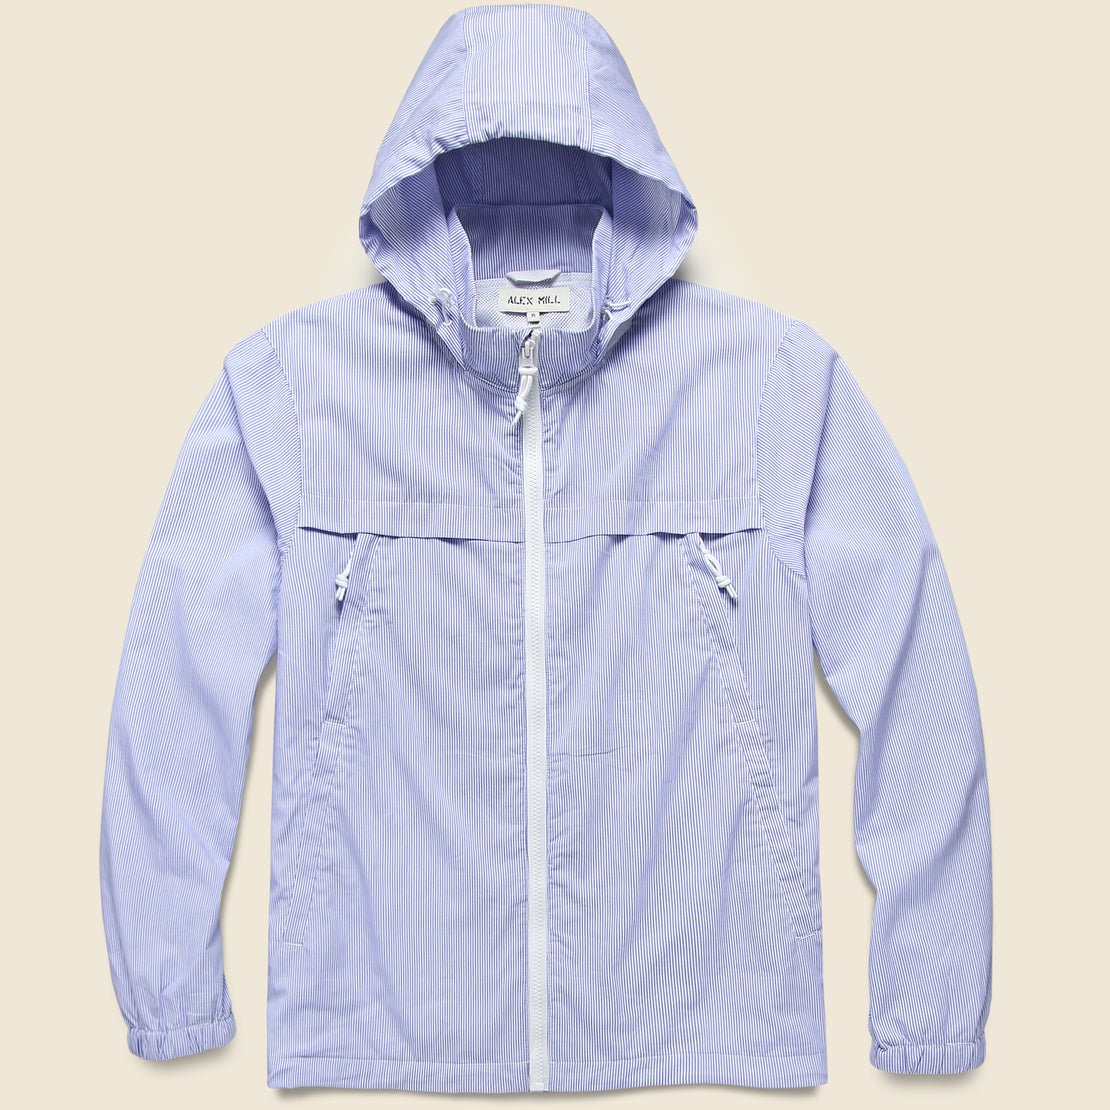 Packable Zip Jacket - Blue/White - Alex Mill - STAG Provisions - Outerwear - Coat / Jacket